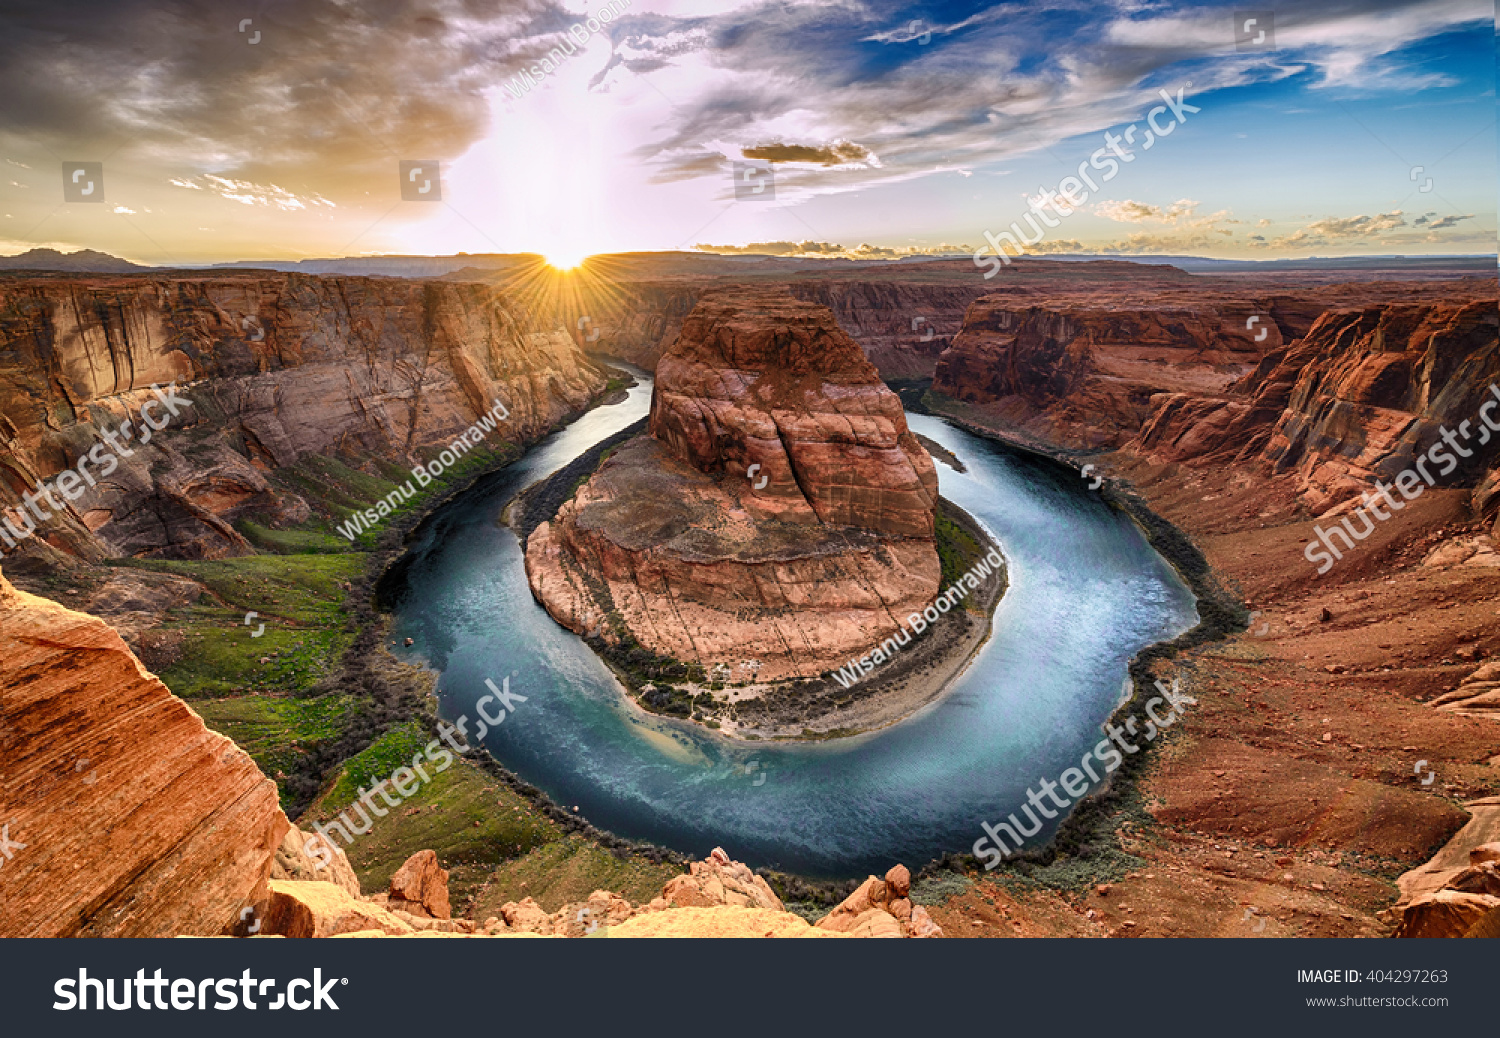 Sunset moment at Horseshoe bend Grand Canyon National Park. Colorado River. famous view point. #404297263